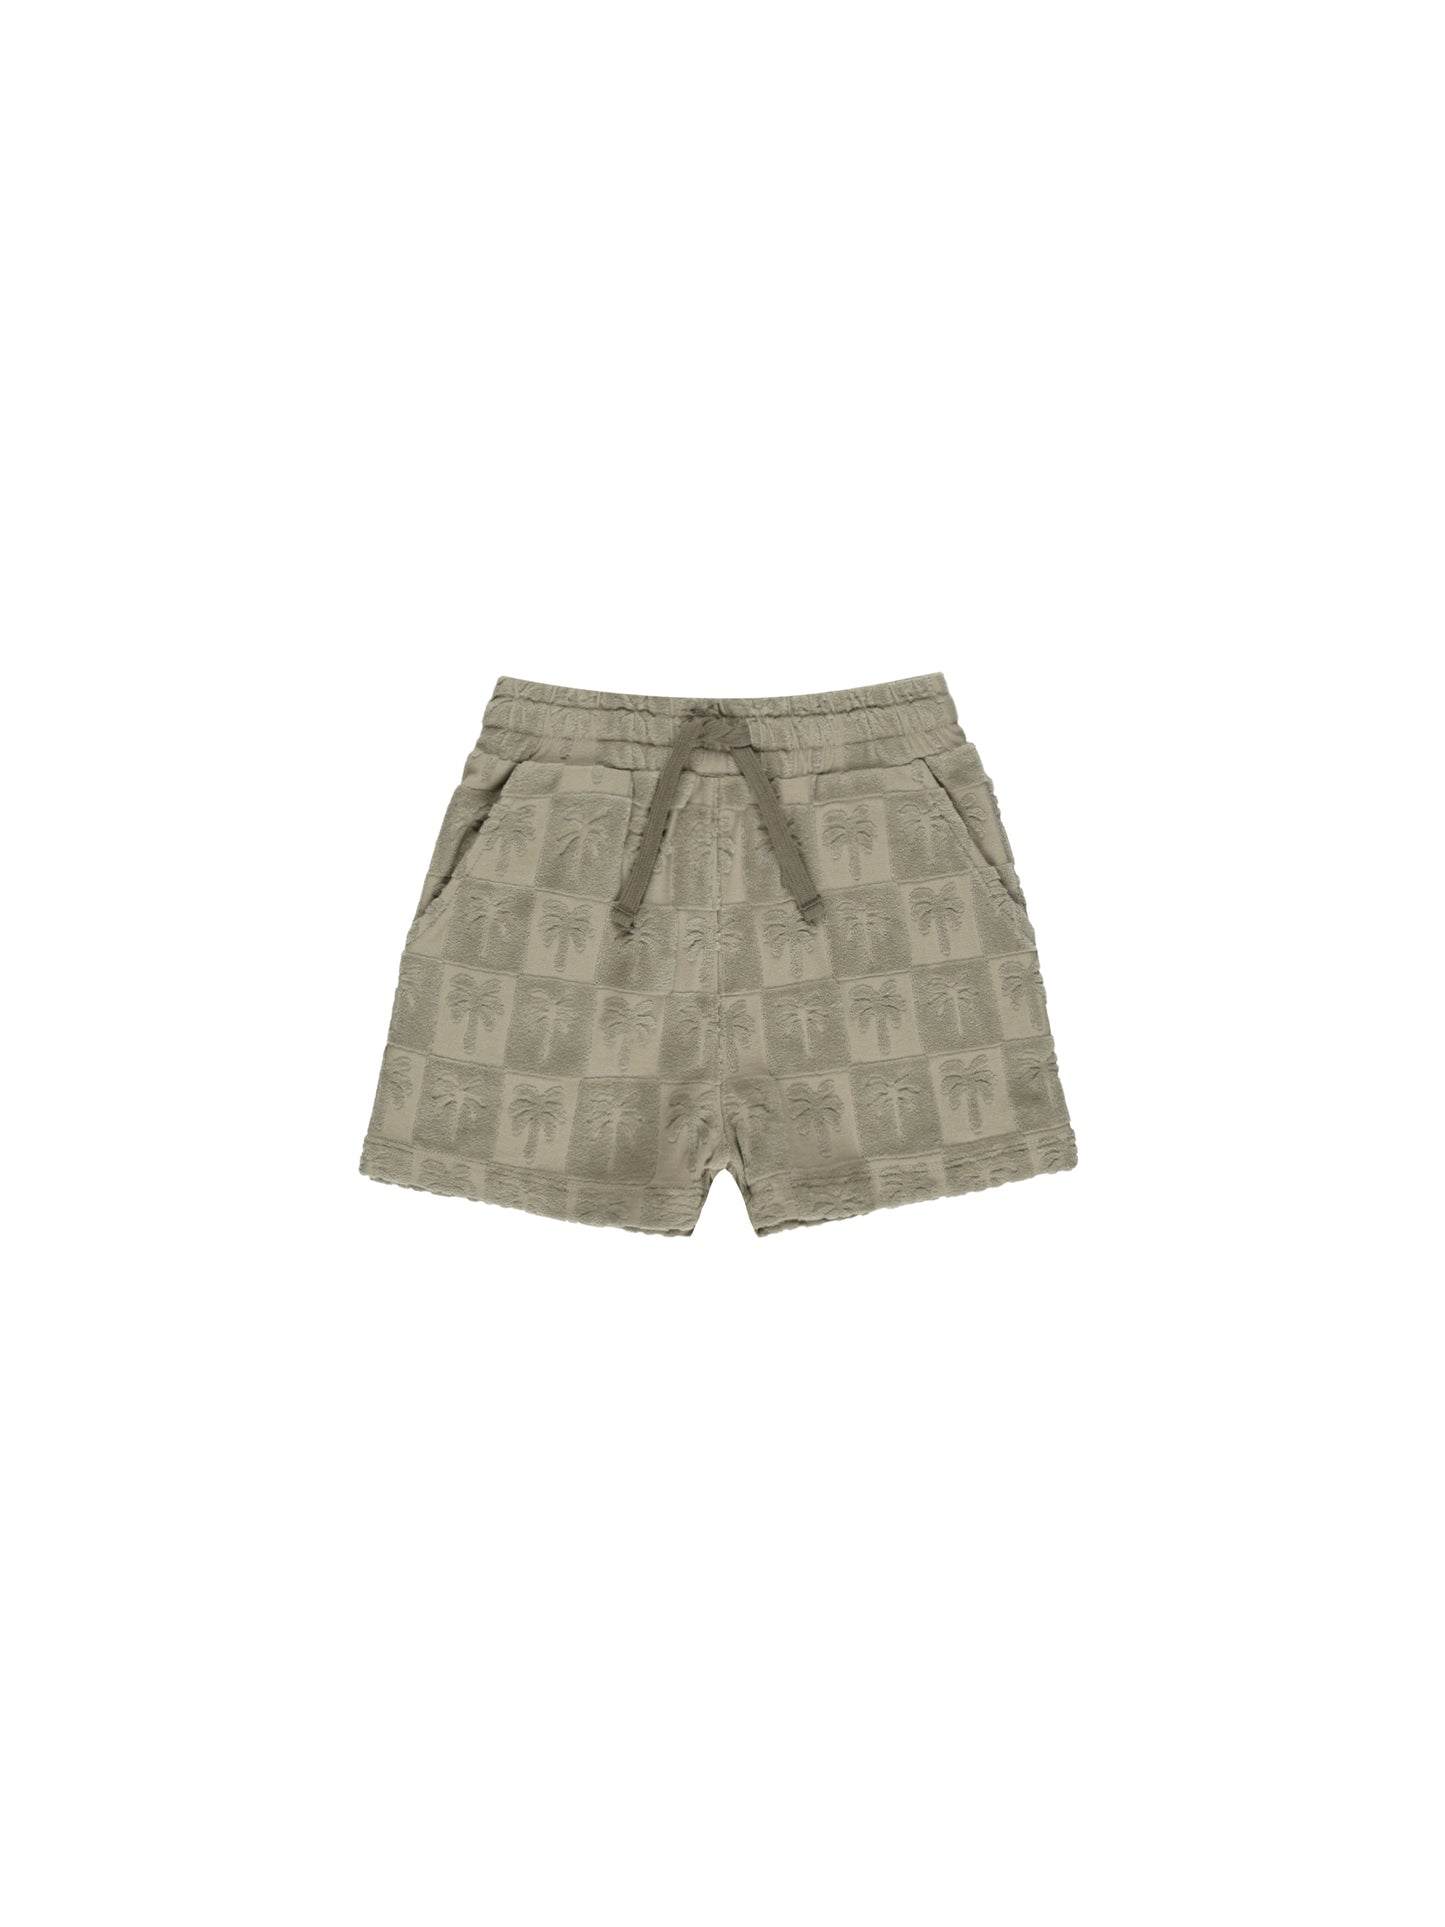 Rylee + Cru Relaxed Short Palm Check